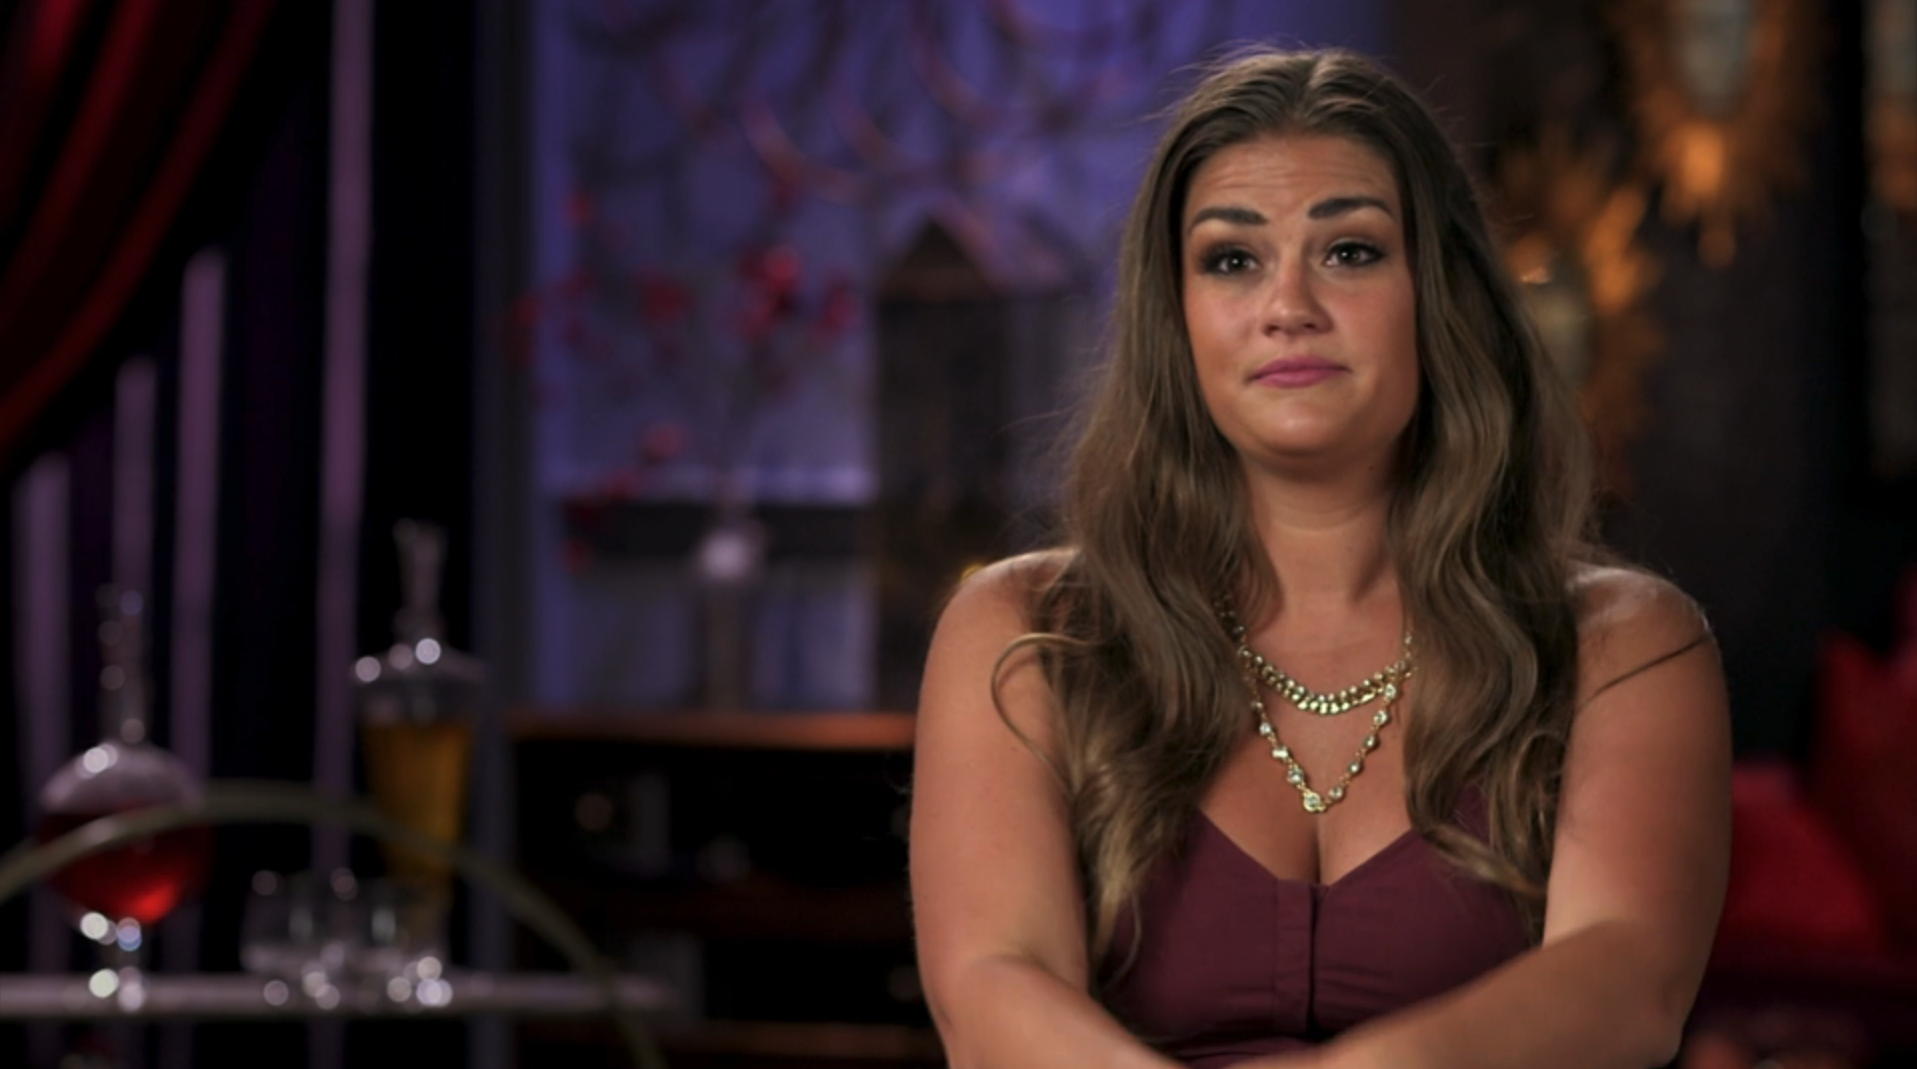 Brittany looking annoyed during a confessional